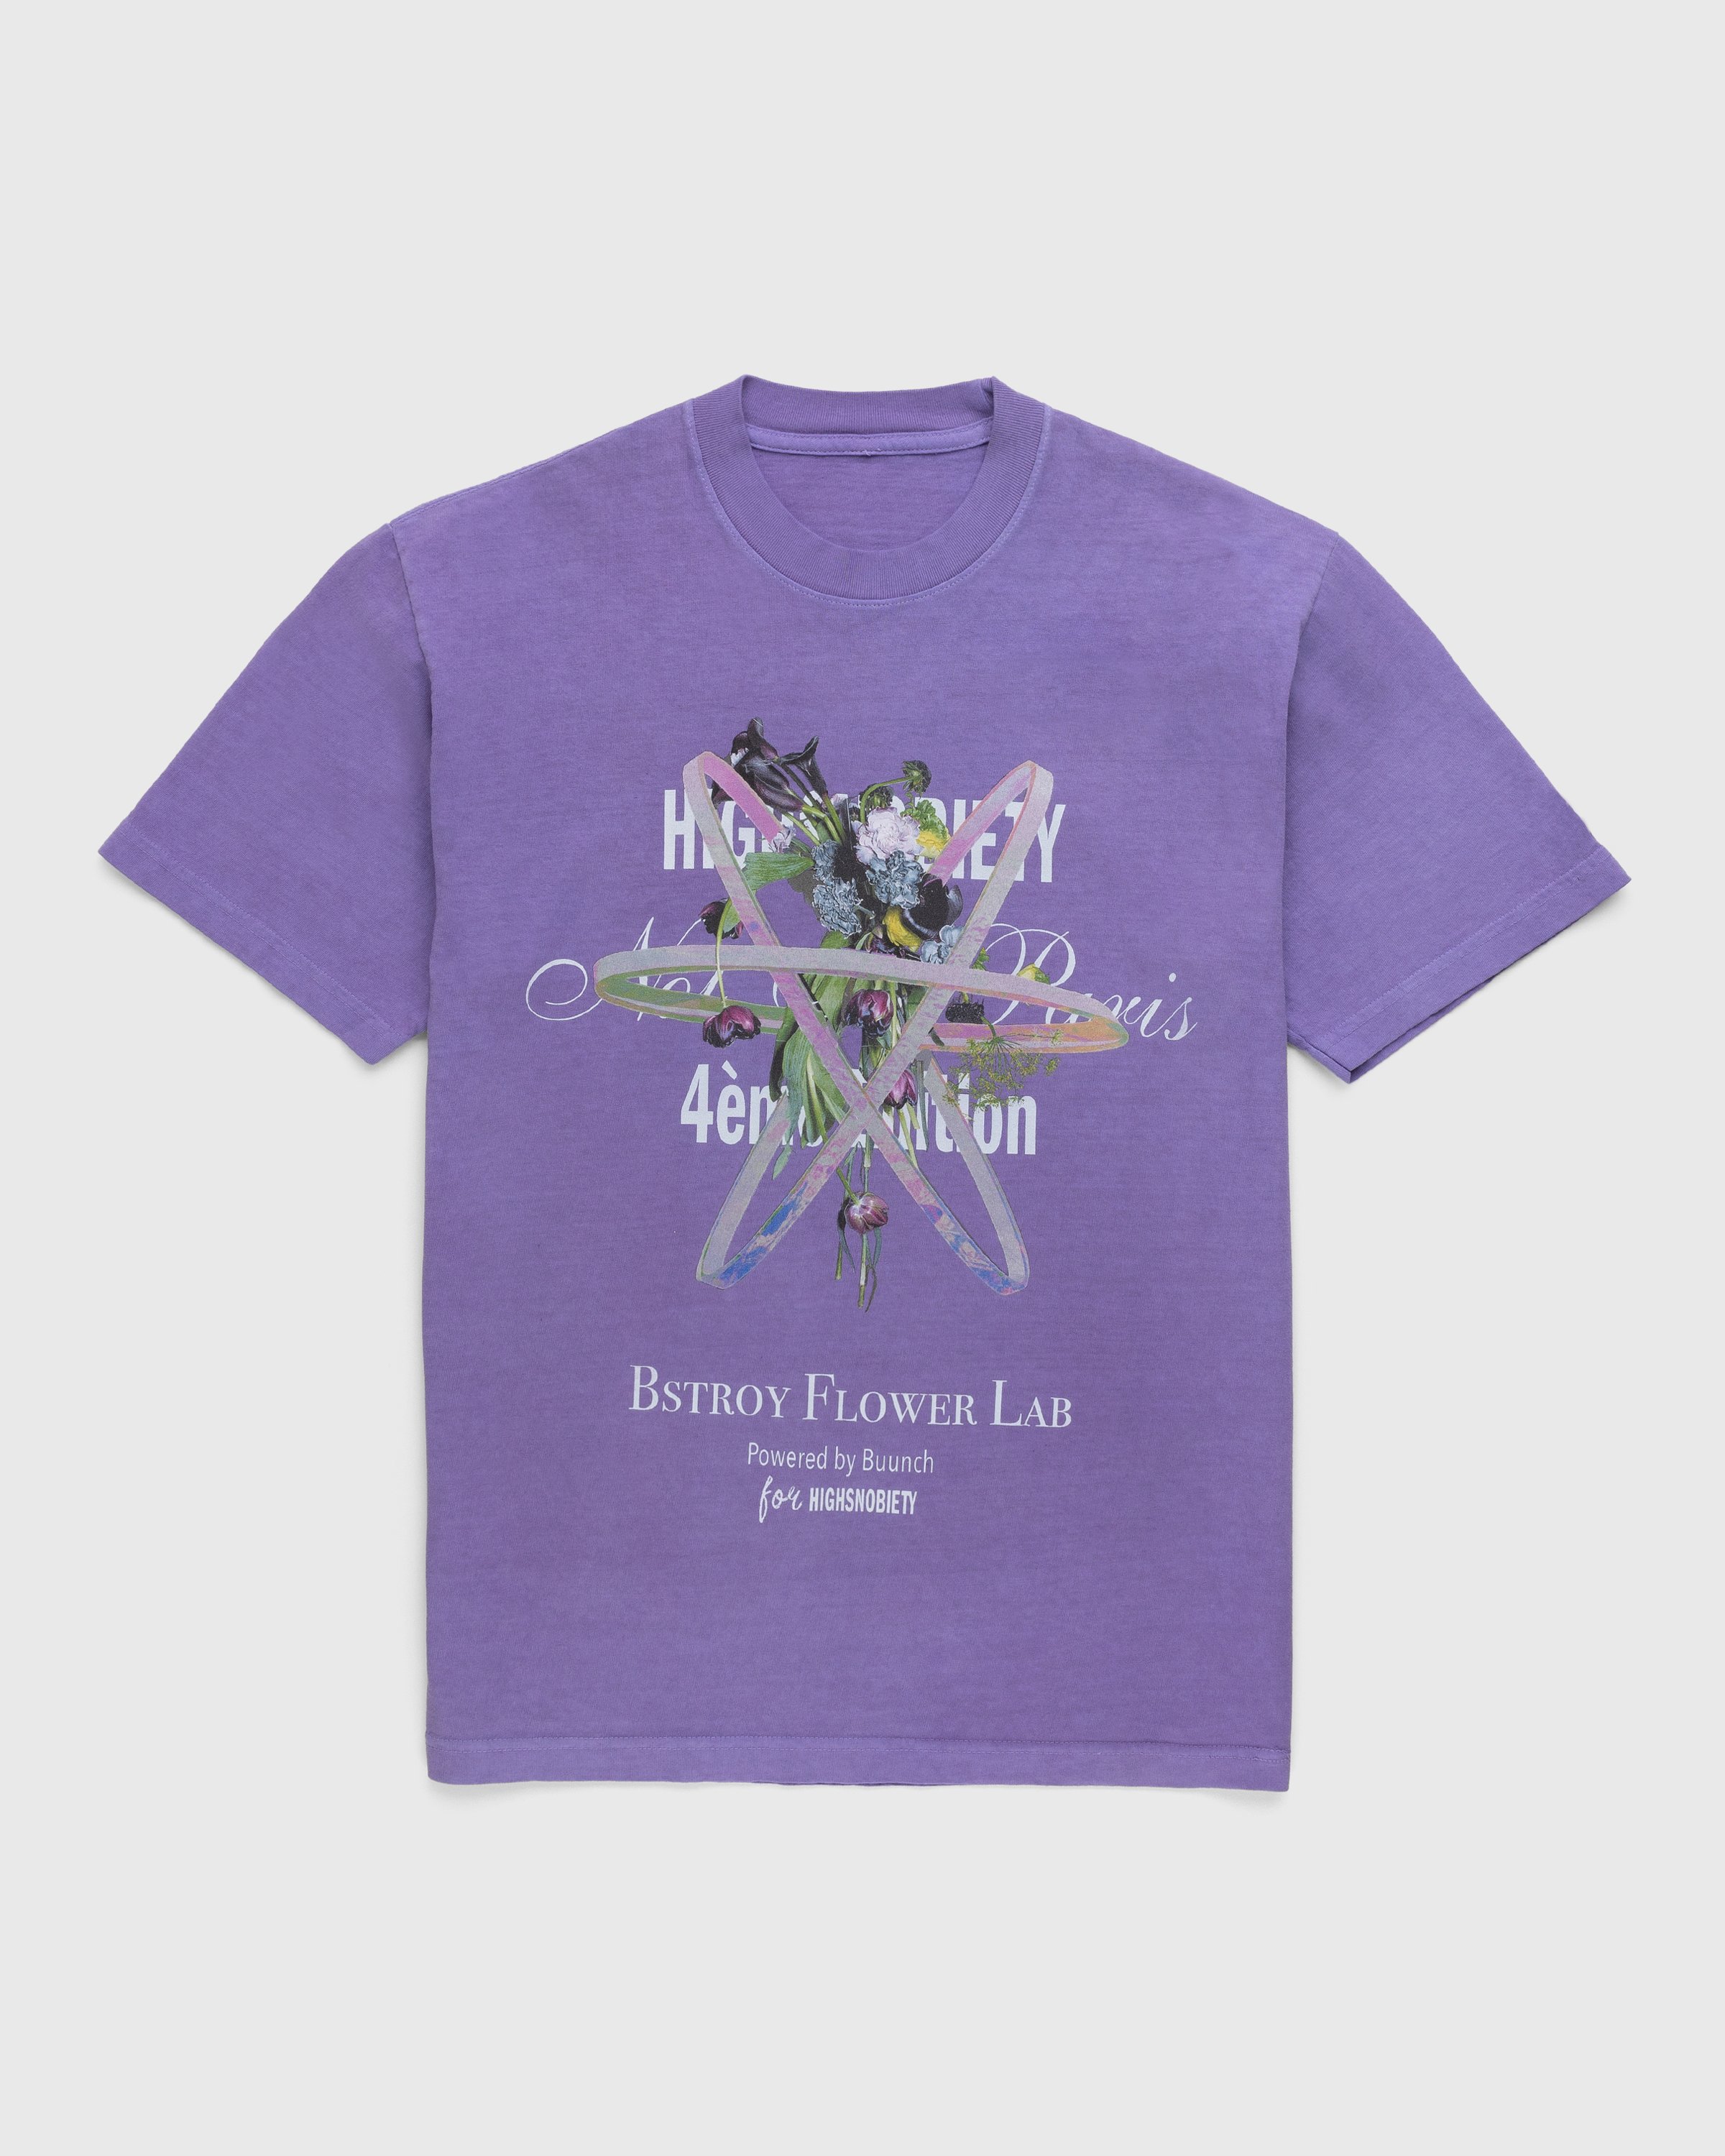 Bstroy x Highsnobiety - Not In Paris 4 Flower T-Shirt Lavender - Clothing - Purple - Image 1